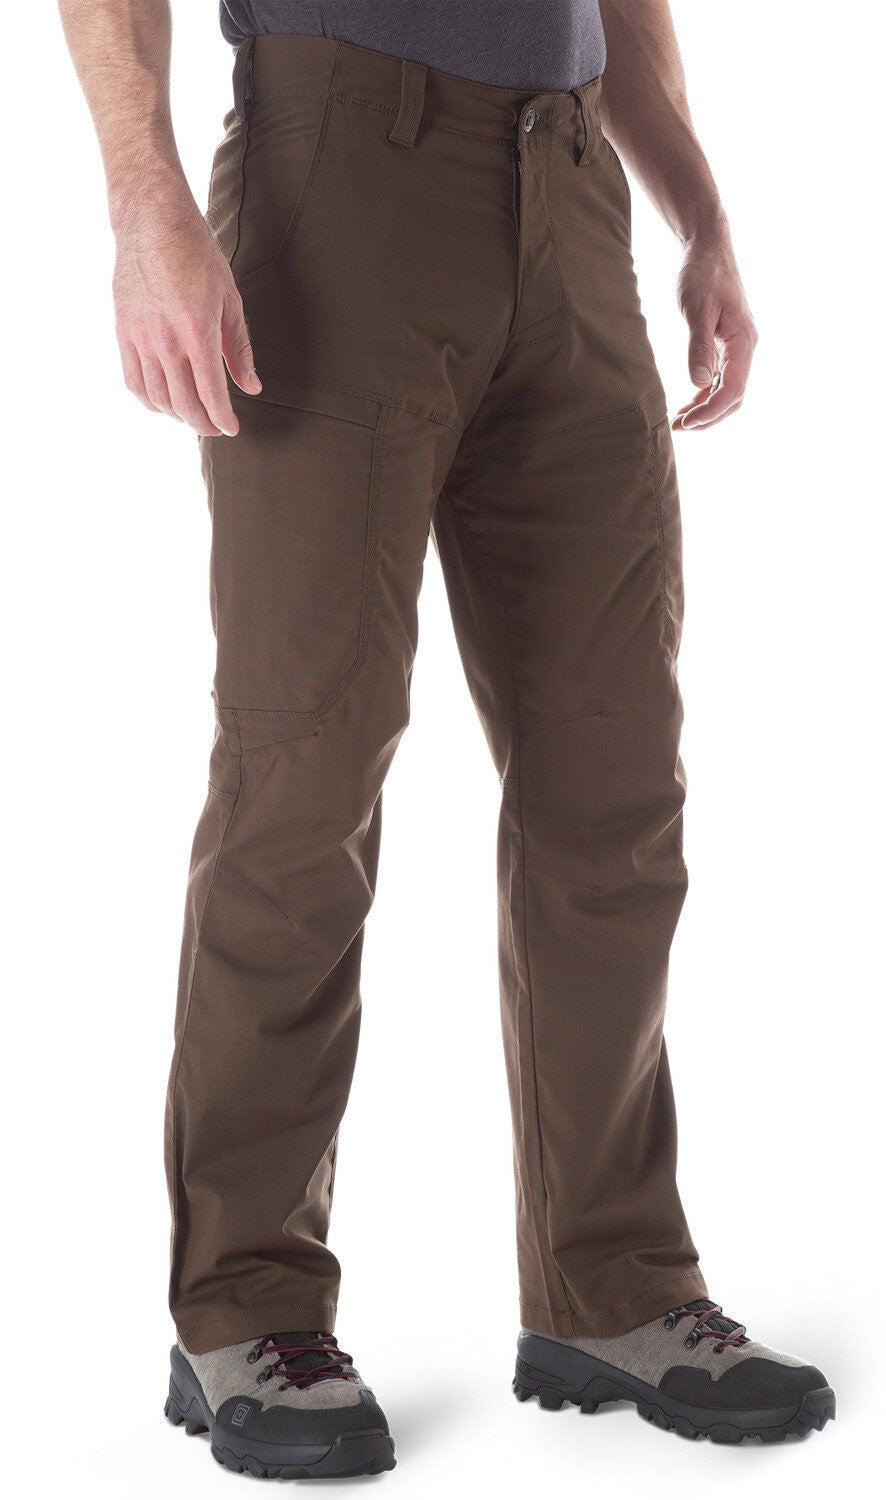 APEX Pants-Battle Brown and Burnt